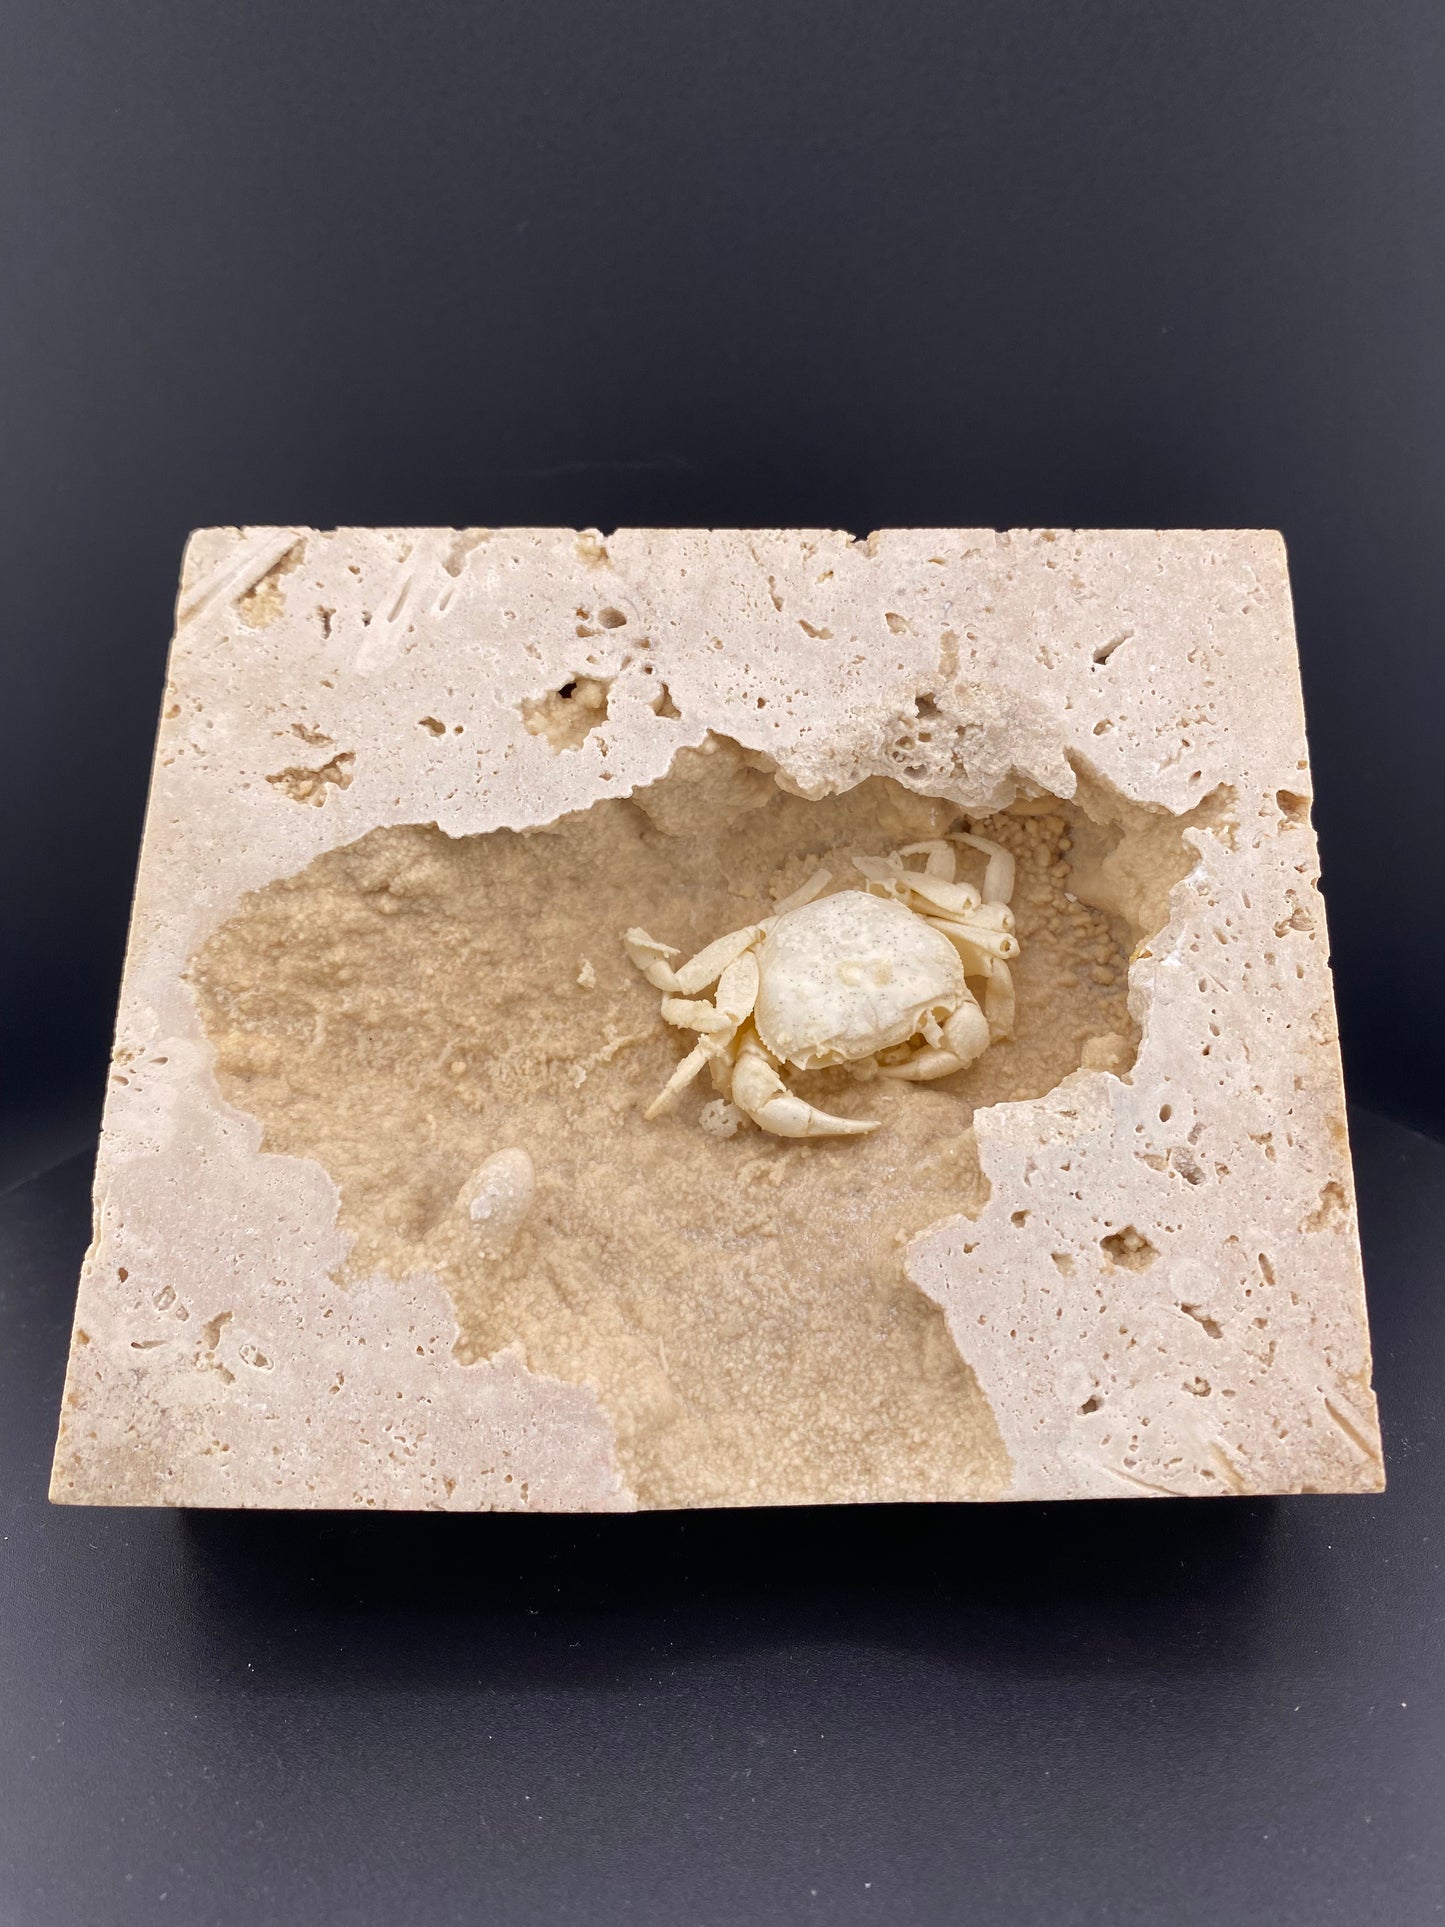 Fossilized Freshwater Crab